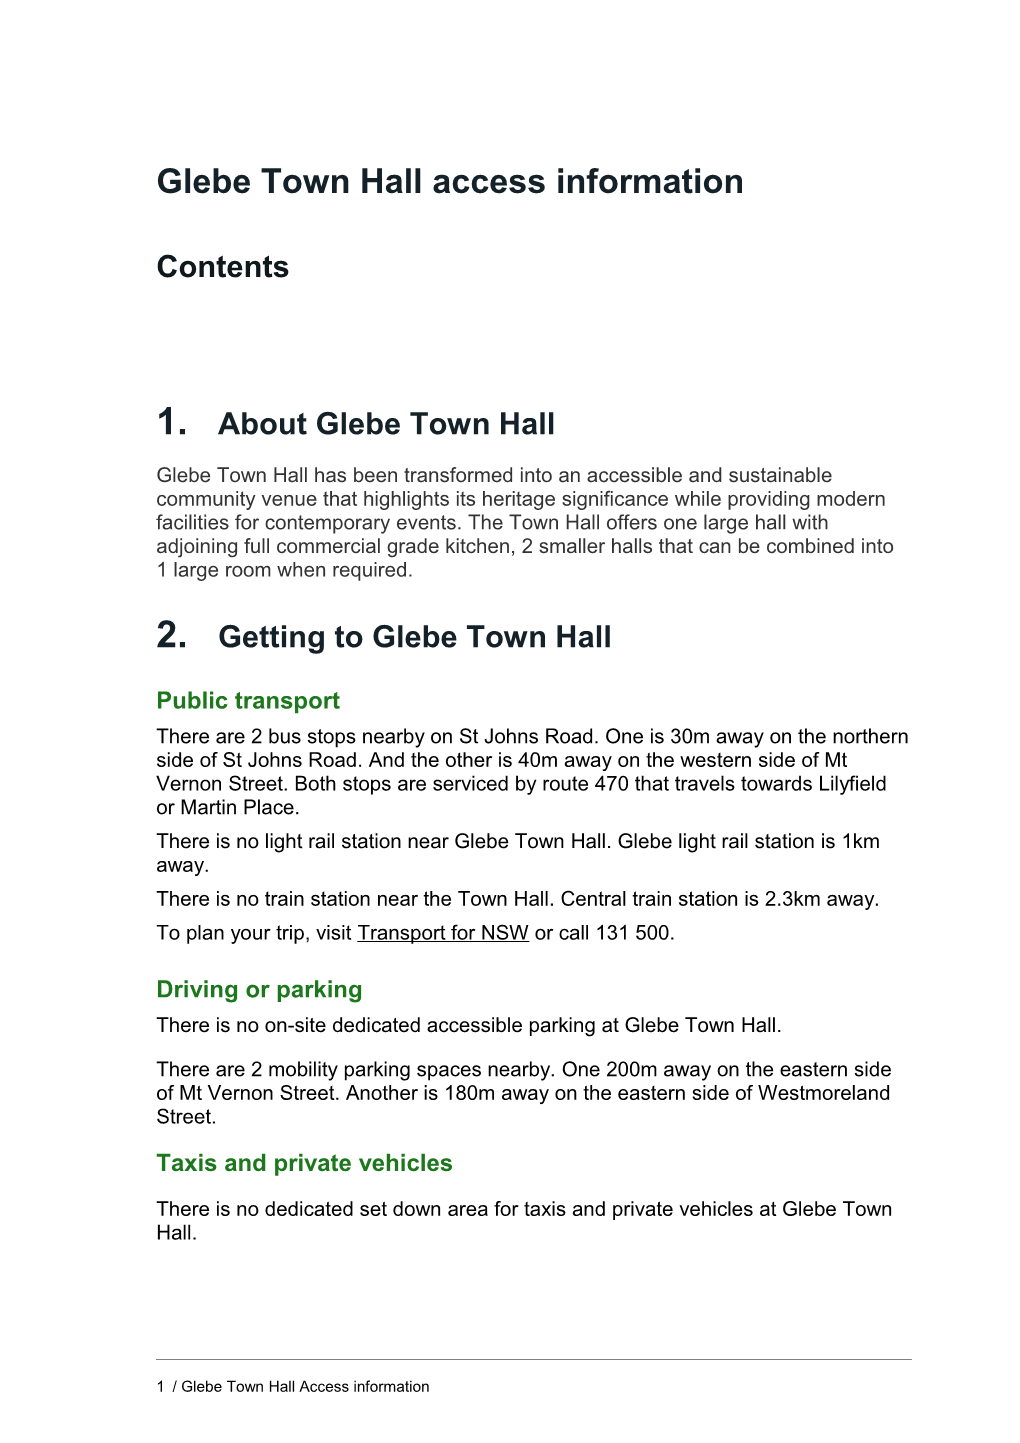 Glebe Town Hall Access Information